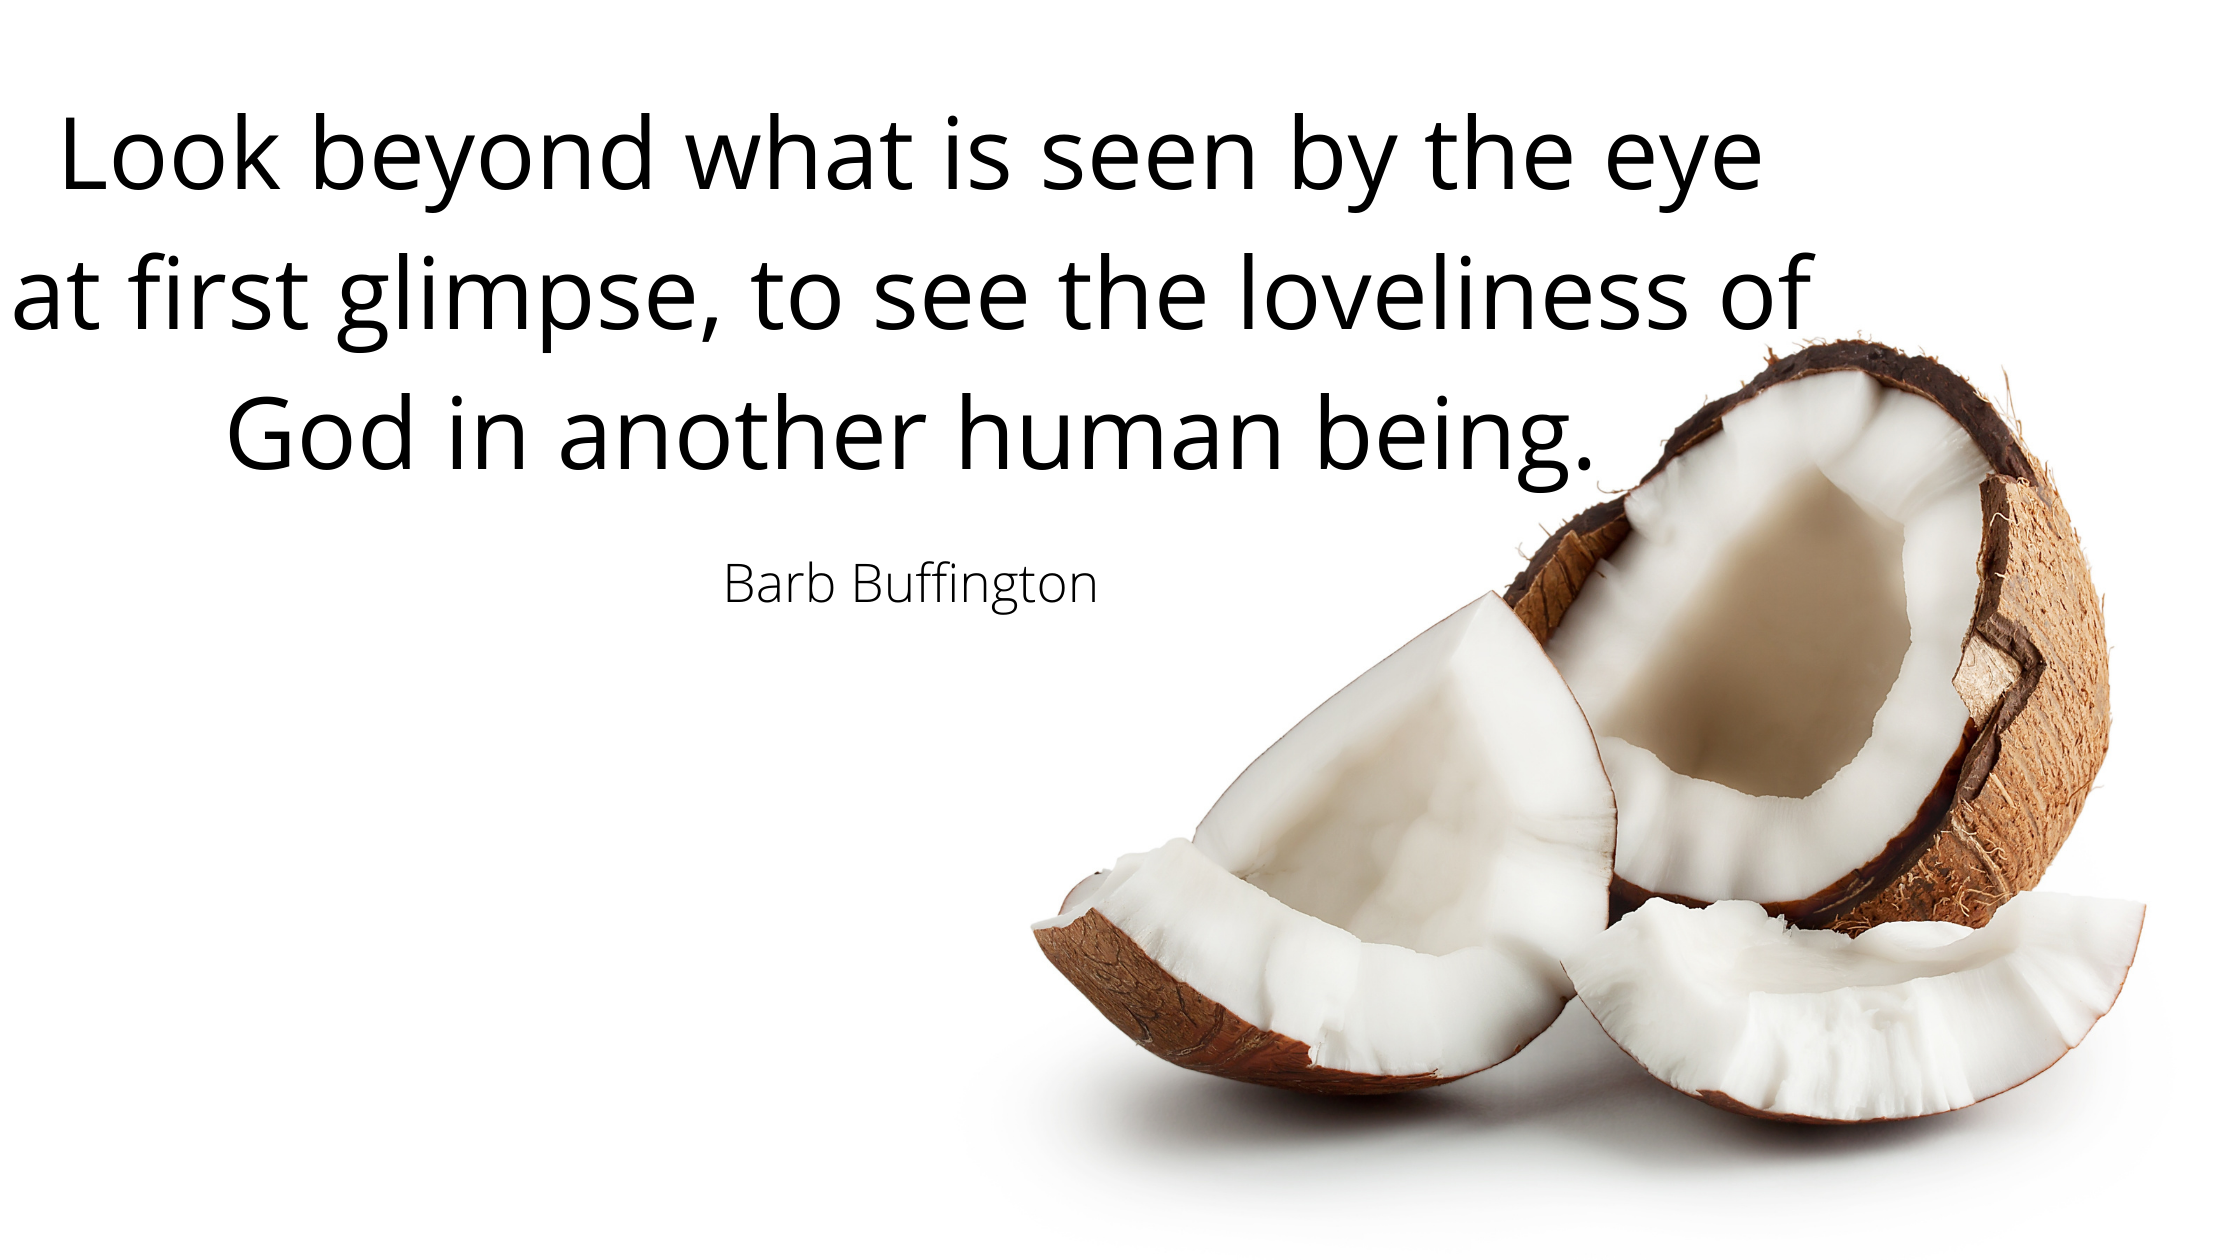 Look beyond what is seen by the eye at first glimpse, to see the loveliness of God in another human being.